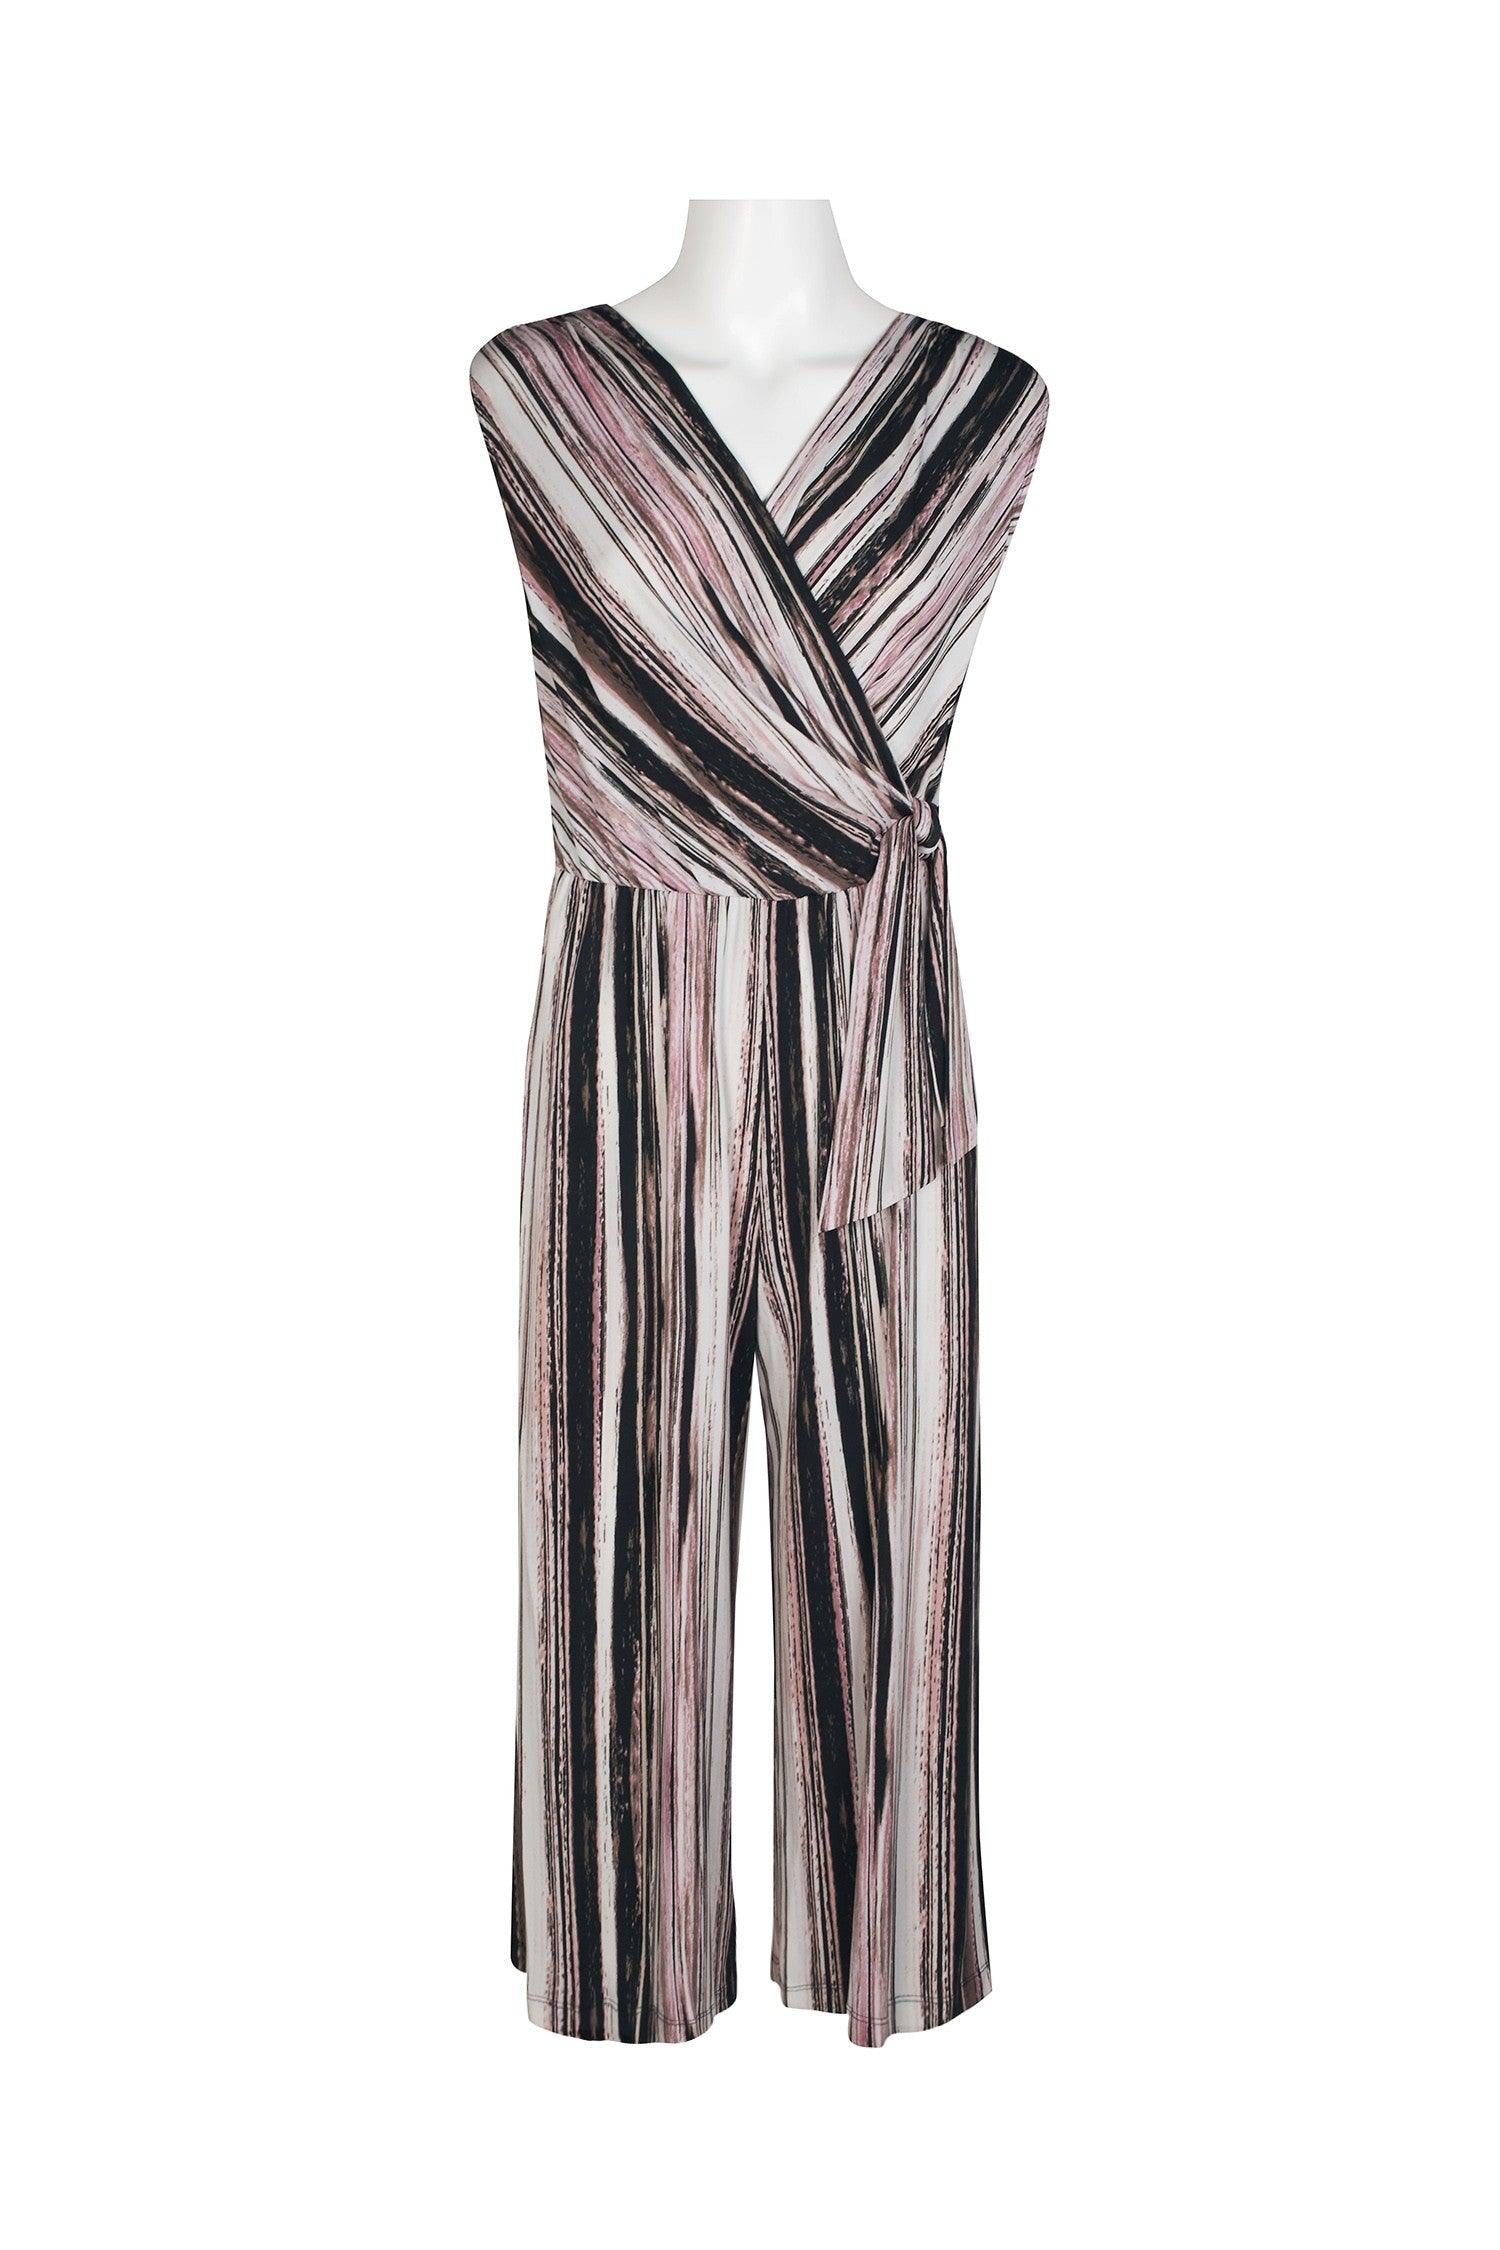 Connected Apparel Multi Print Jumpsuit - The Dress Outlet